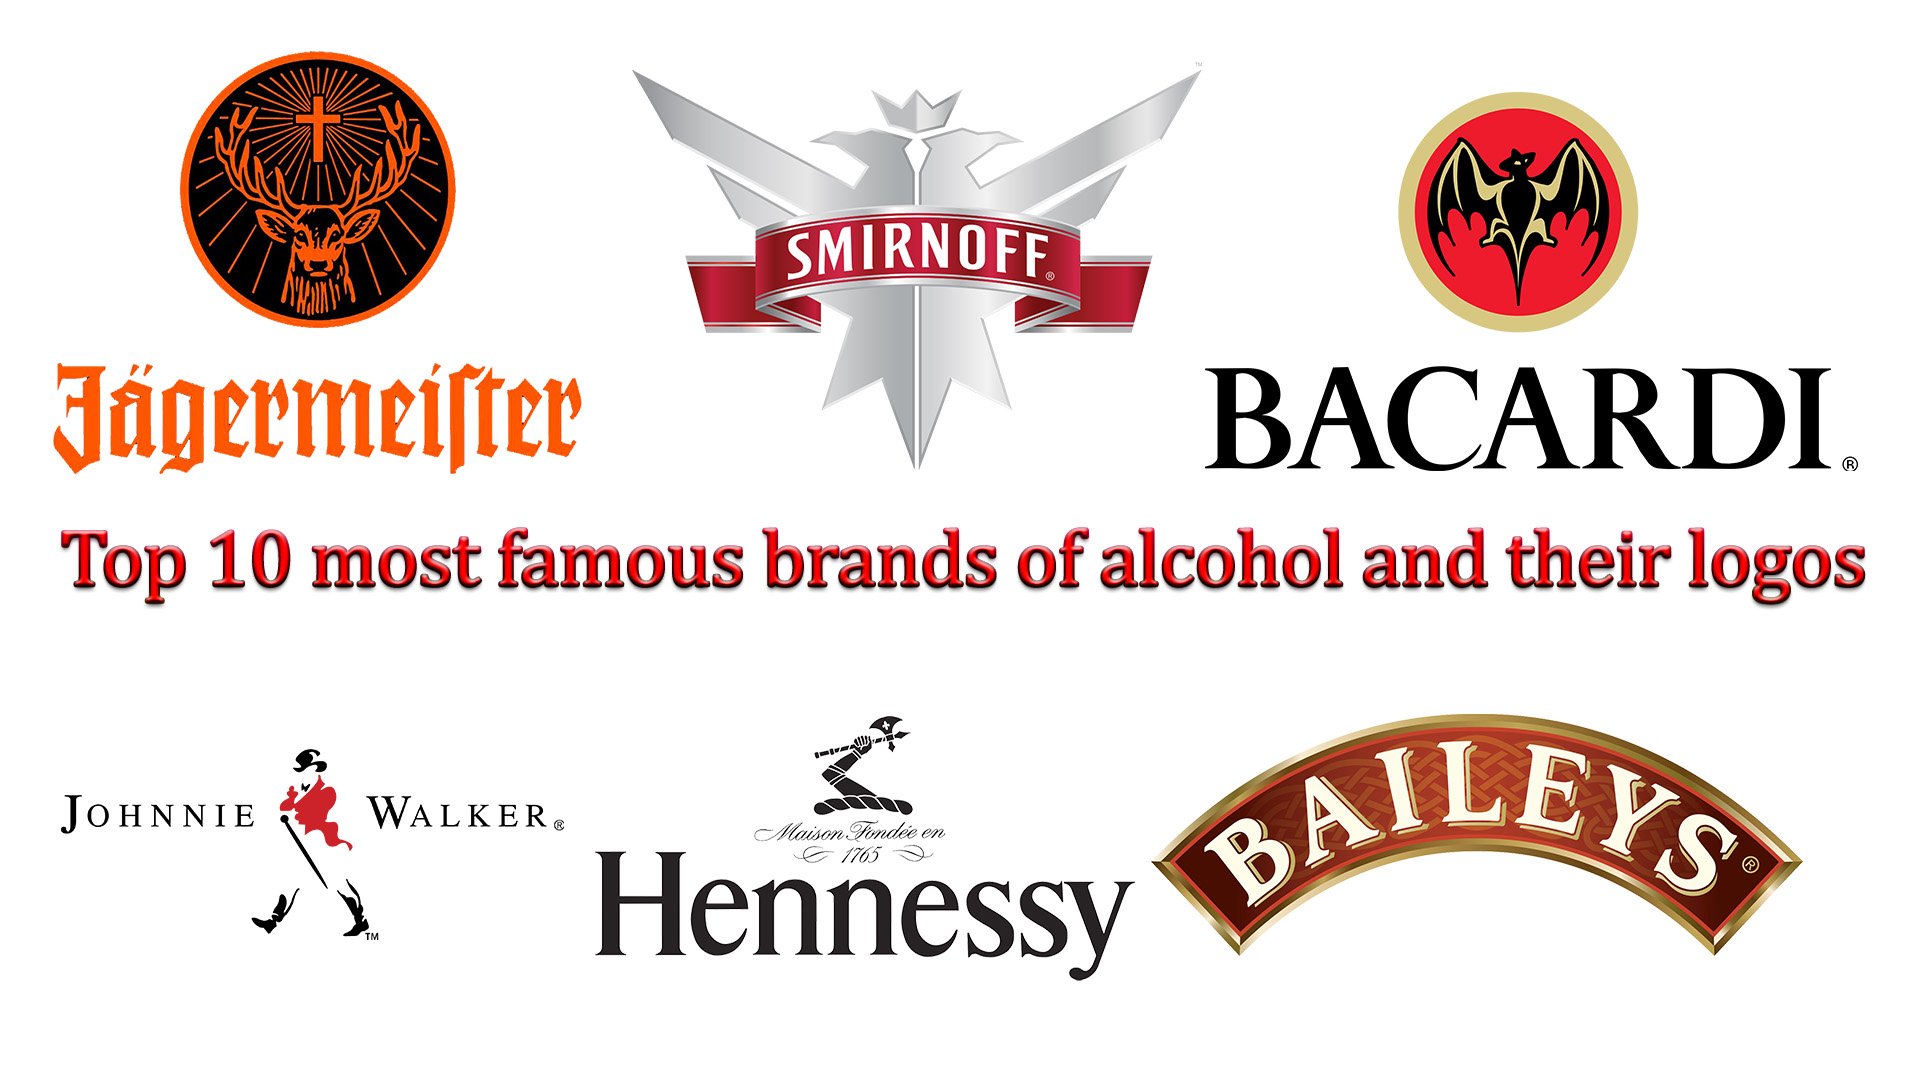 Top 10 most famous brands of alcohol and their logos